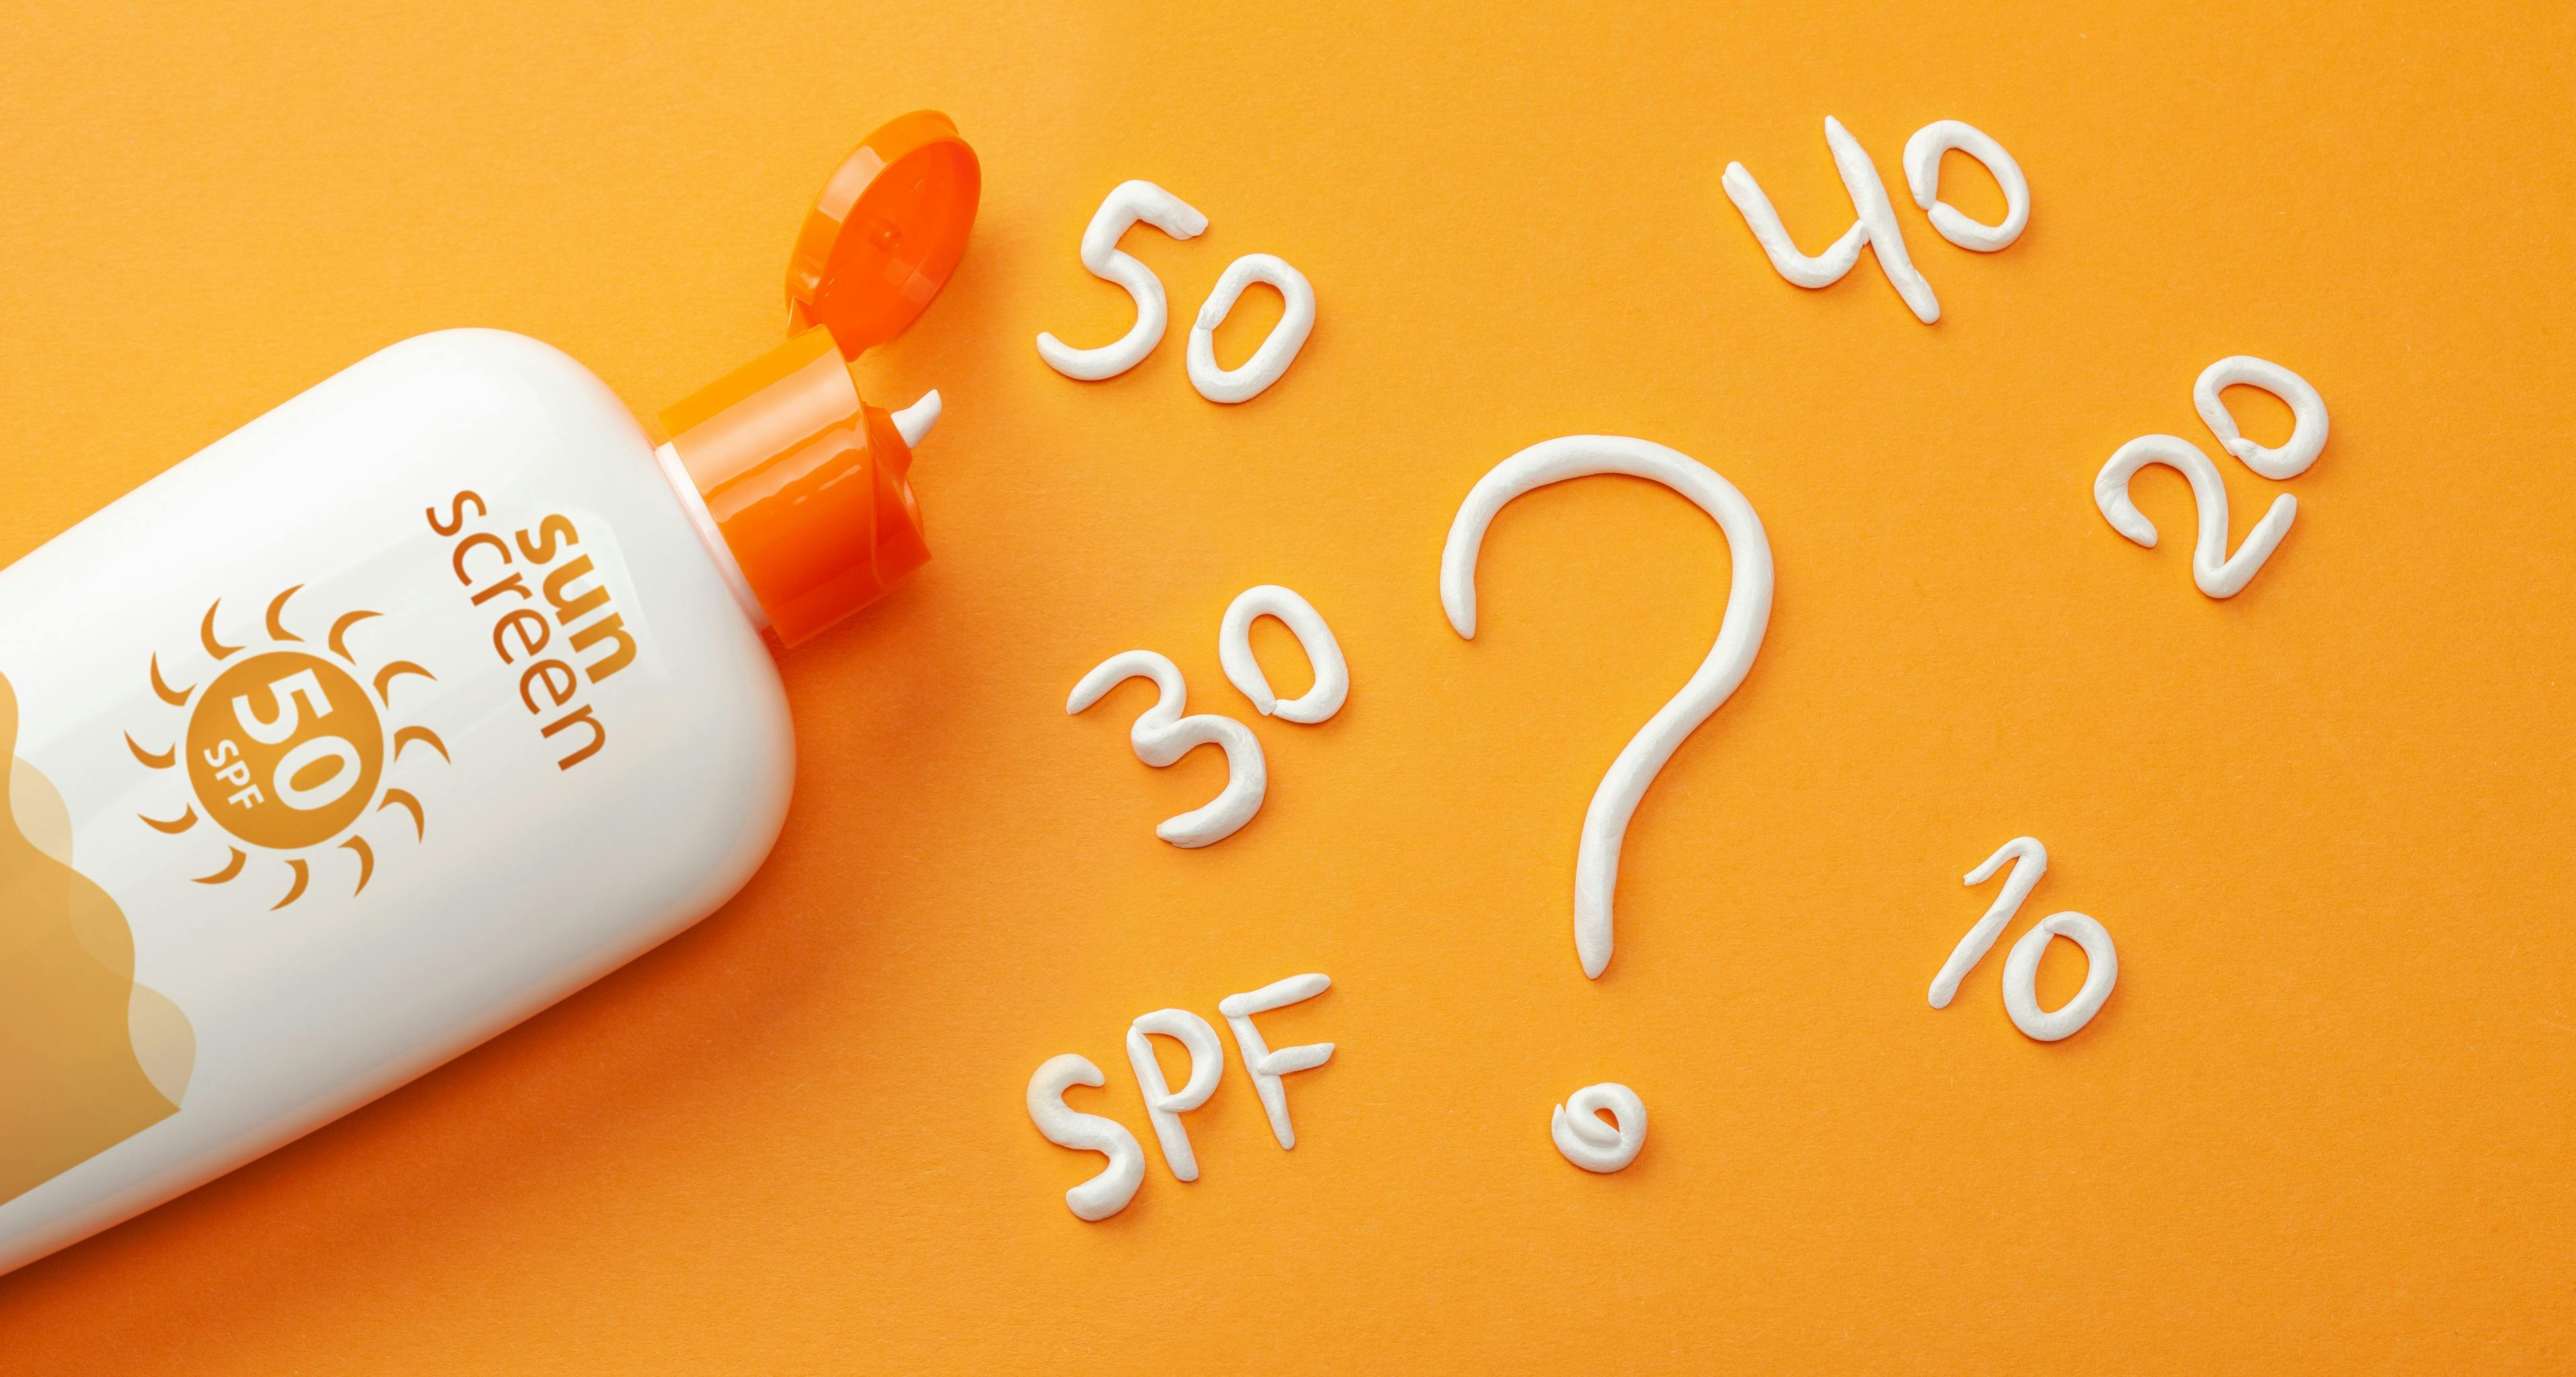 POLL: How Many Gen Z Adults Believe SPF 30 Offers 2x the Protection as SPF 15?